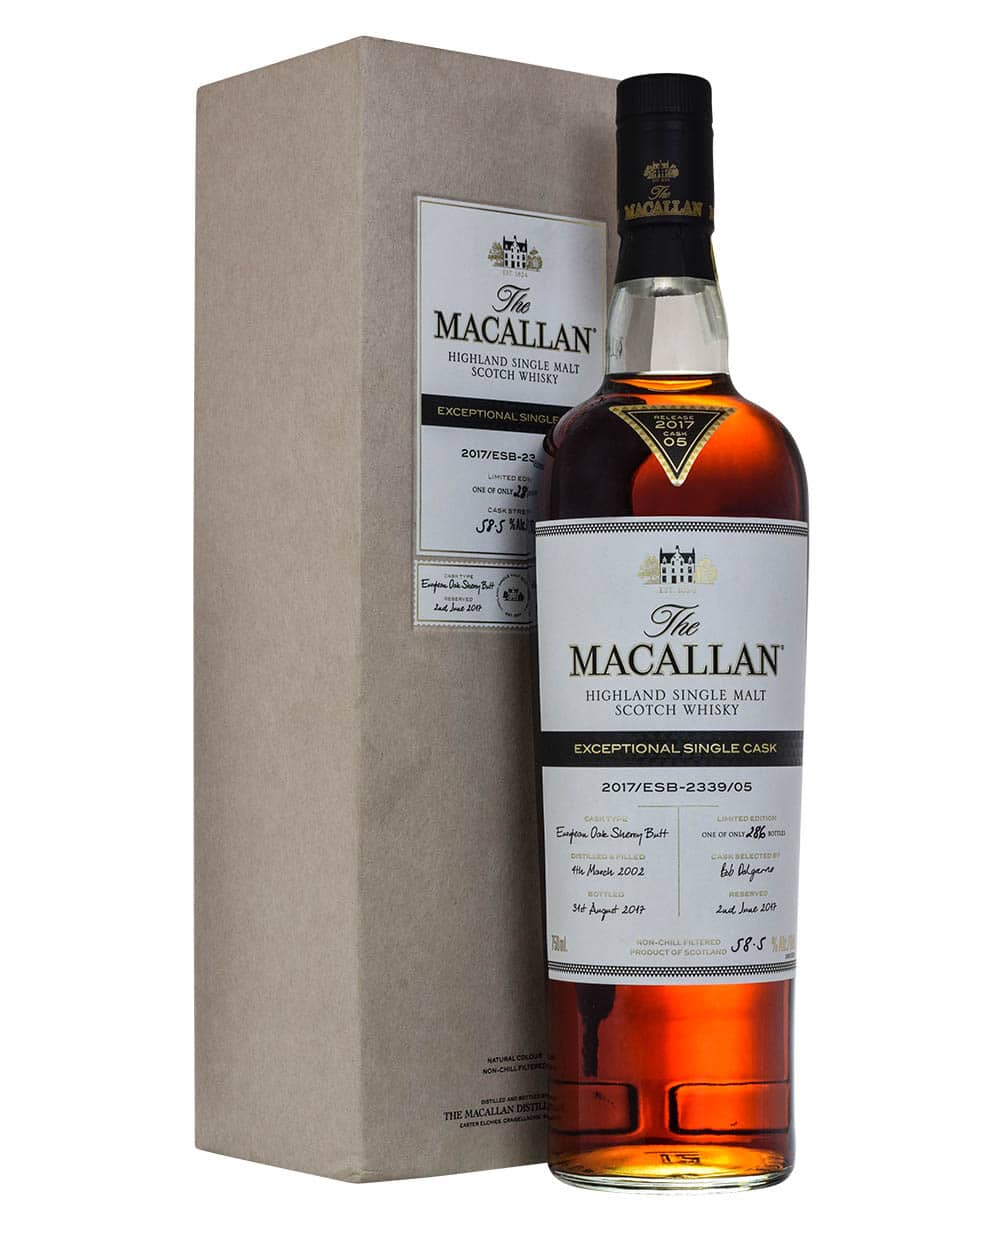 Macallan Exceptional Single Cask 2002-2017 Box Musthave Malts MHM